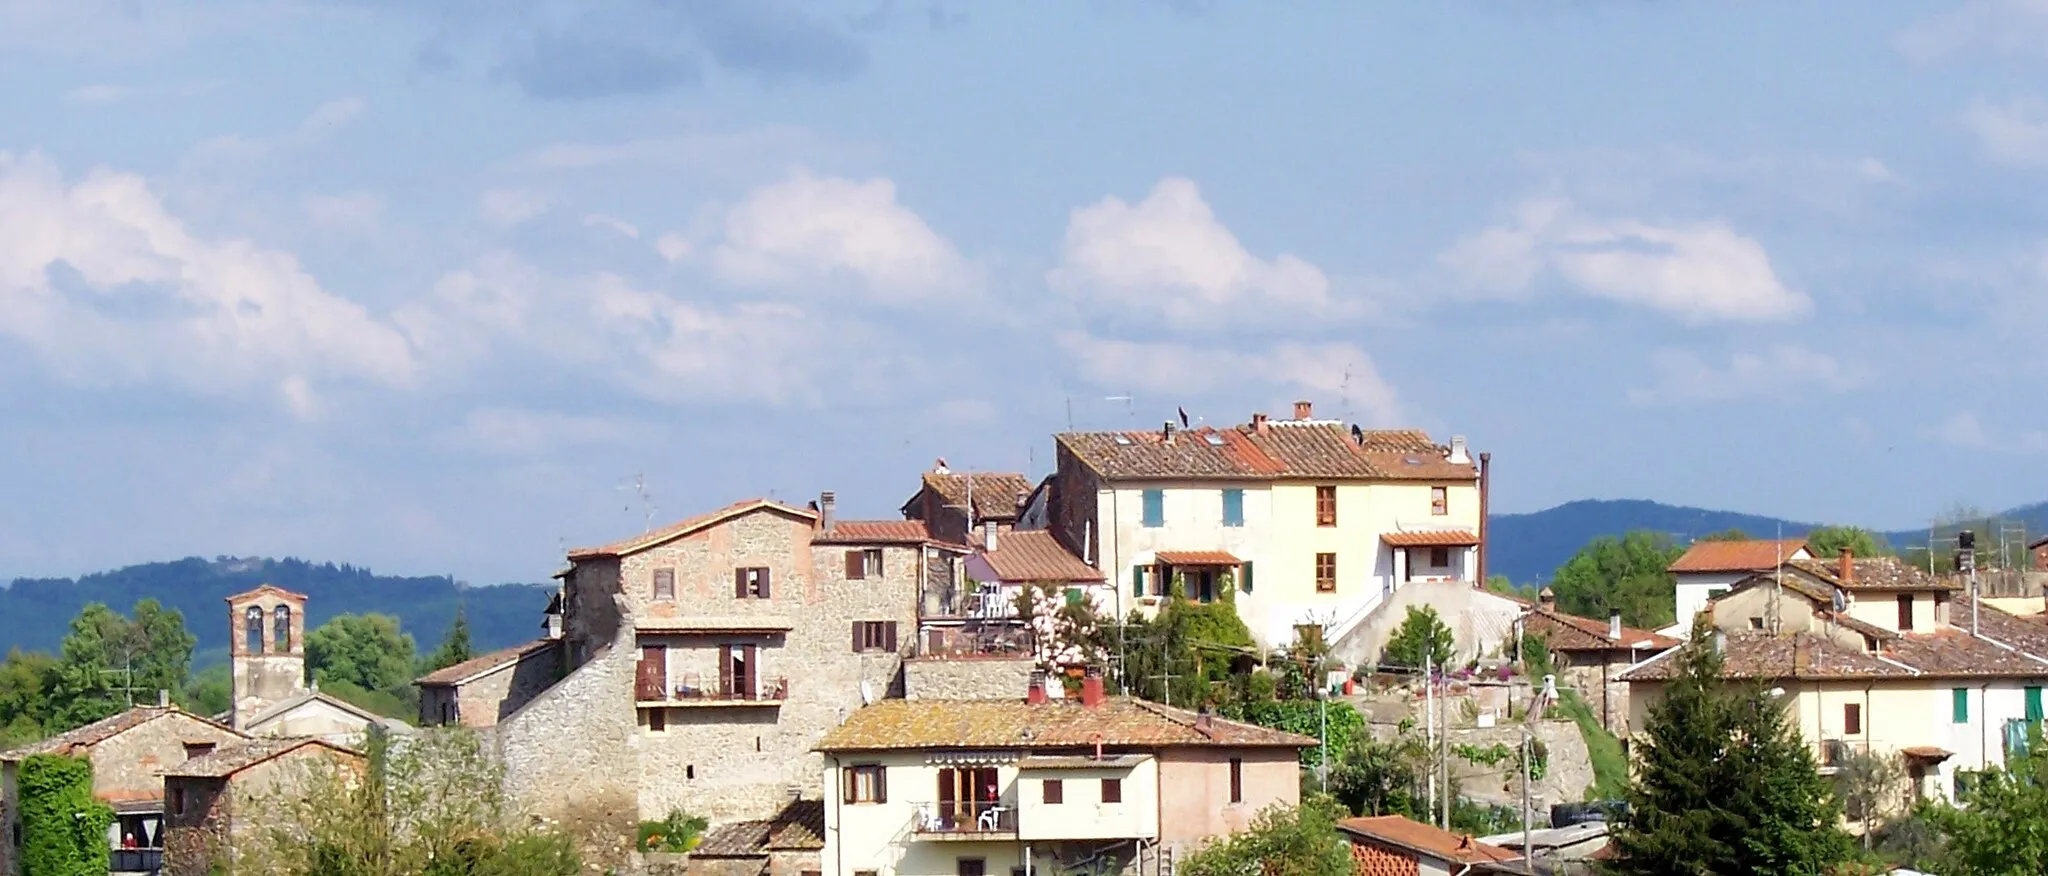 Photo showing: Panorama of the secondary urban agglomeration of Mercatale Valdarno, a vilage on the hills of Montevarchi. In the middle age it was called San Biagio Tower and it was a fortified citadel